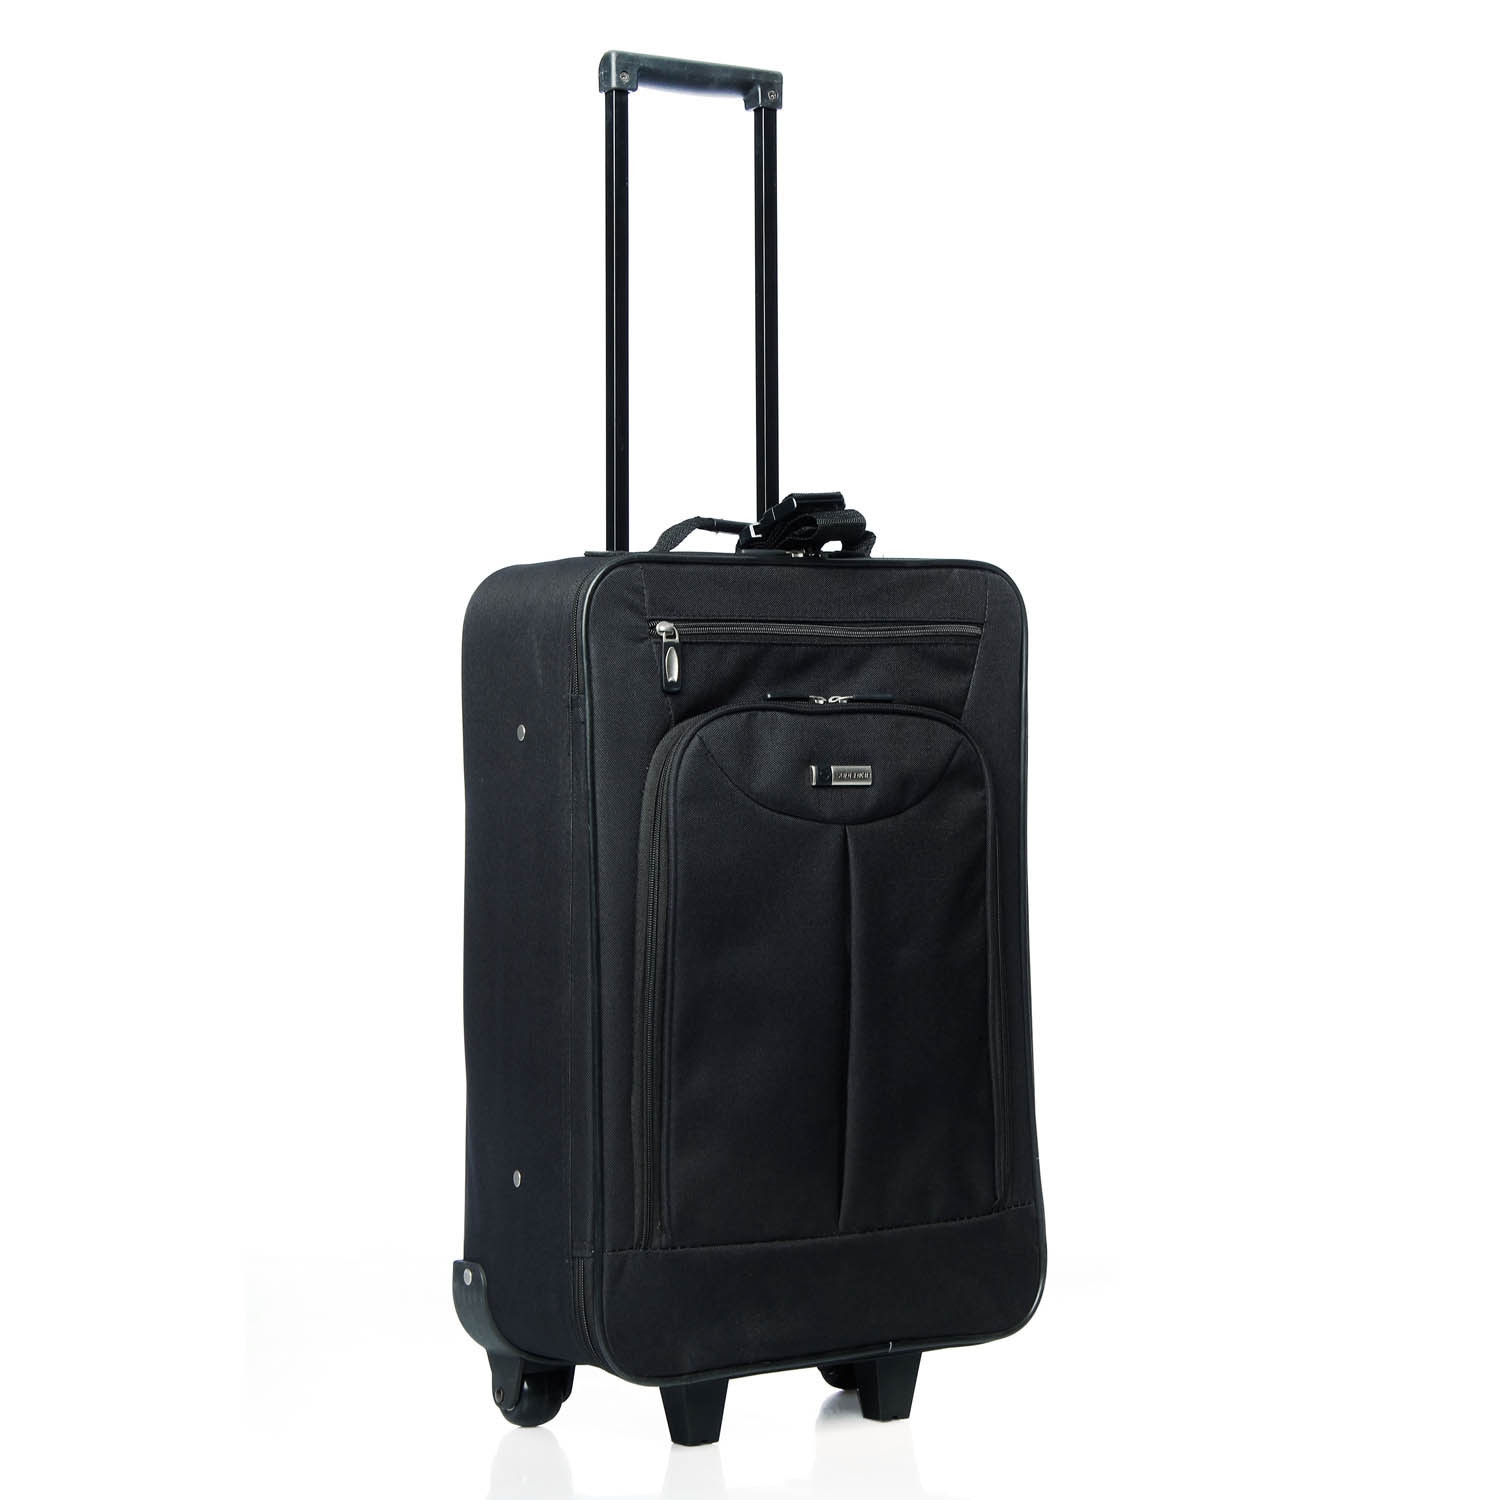 Delsey Helium Shadow 2.0 25 inch Medium Rolling Upright Suitcase